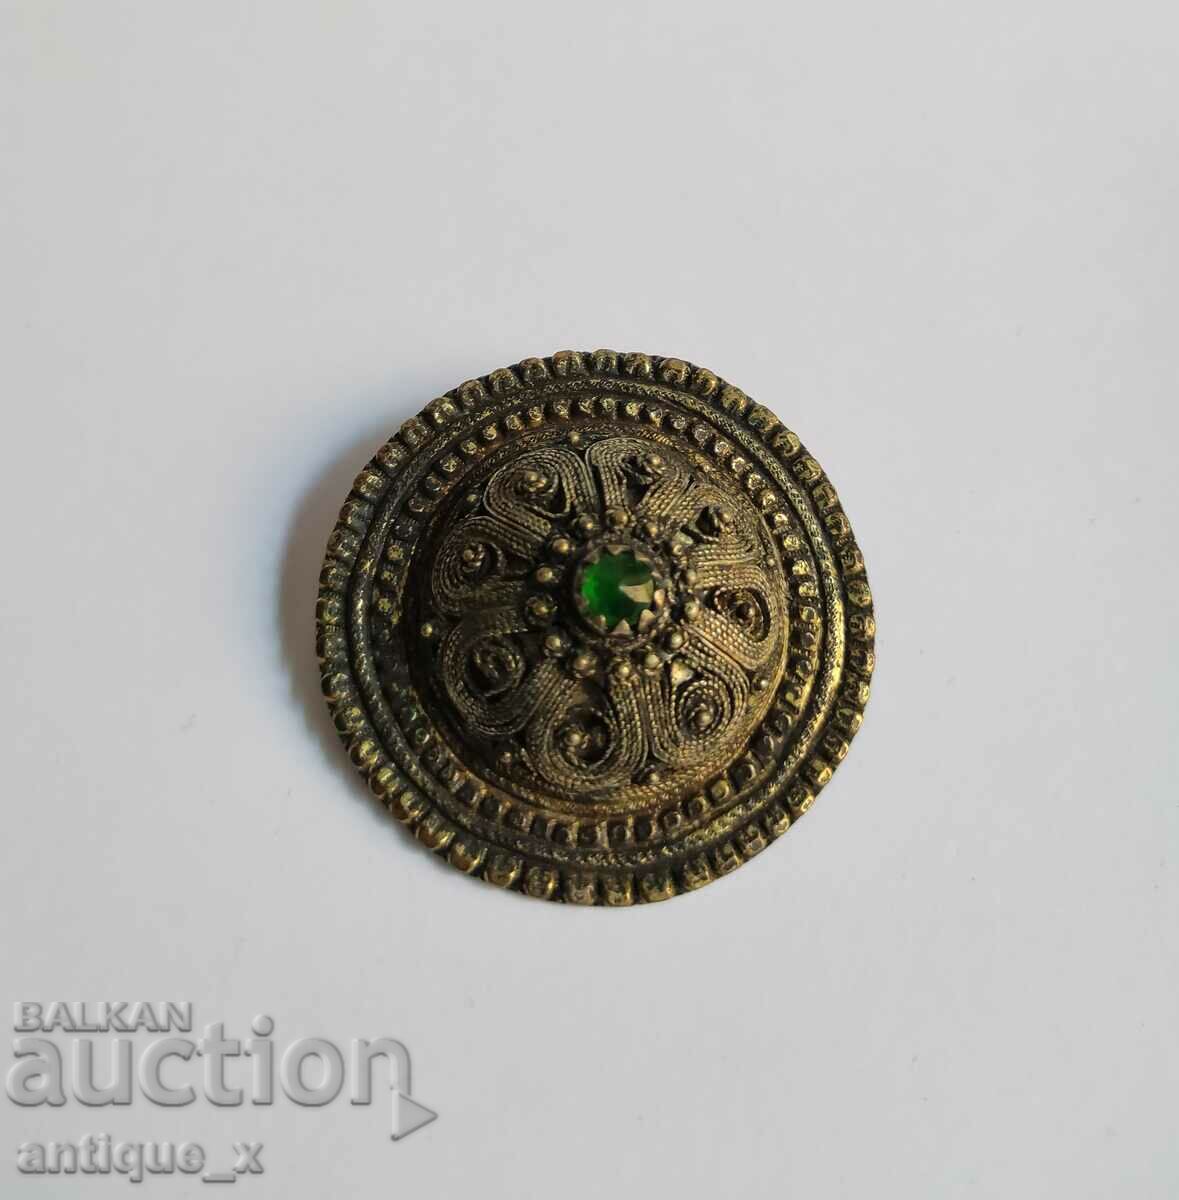 Old Bulgarian Revival jewelry-sachan-with green glass